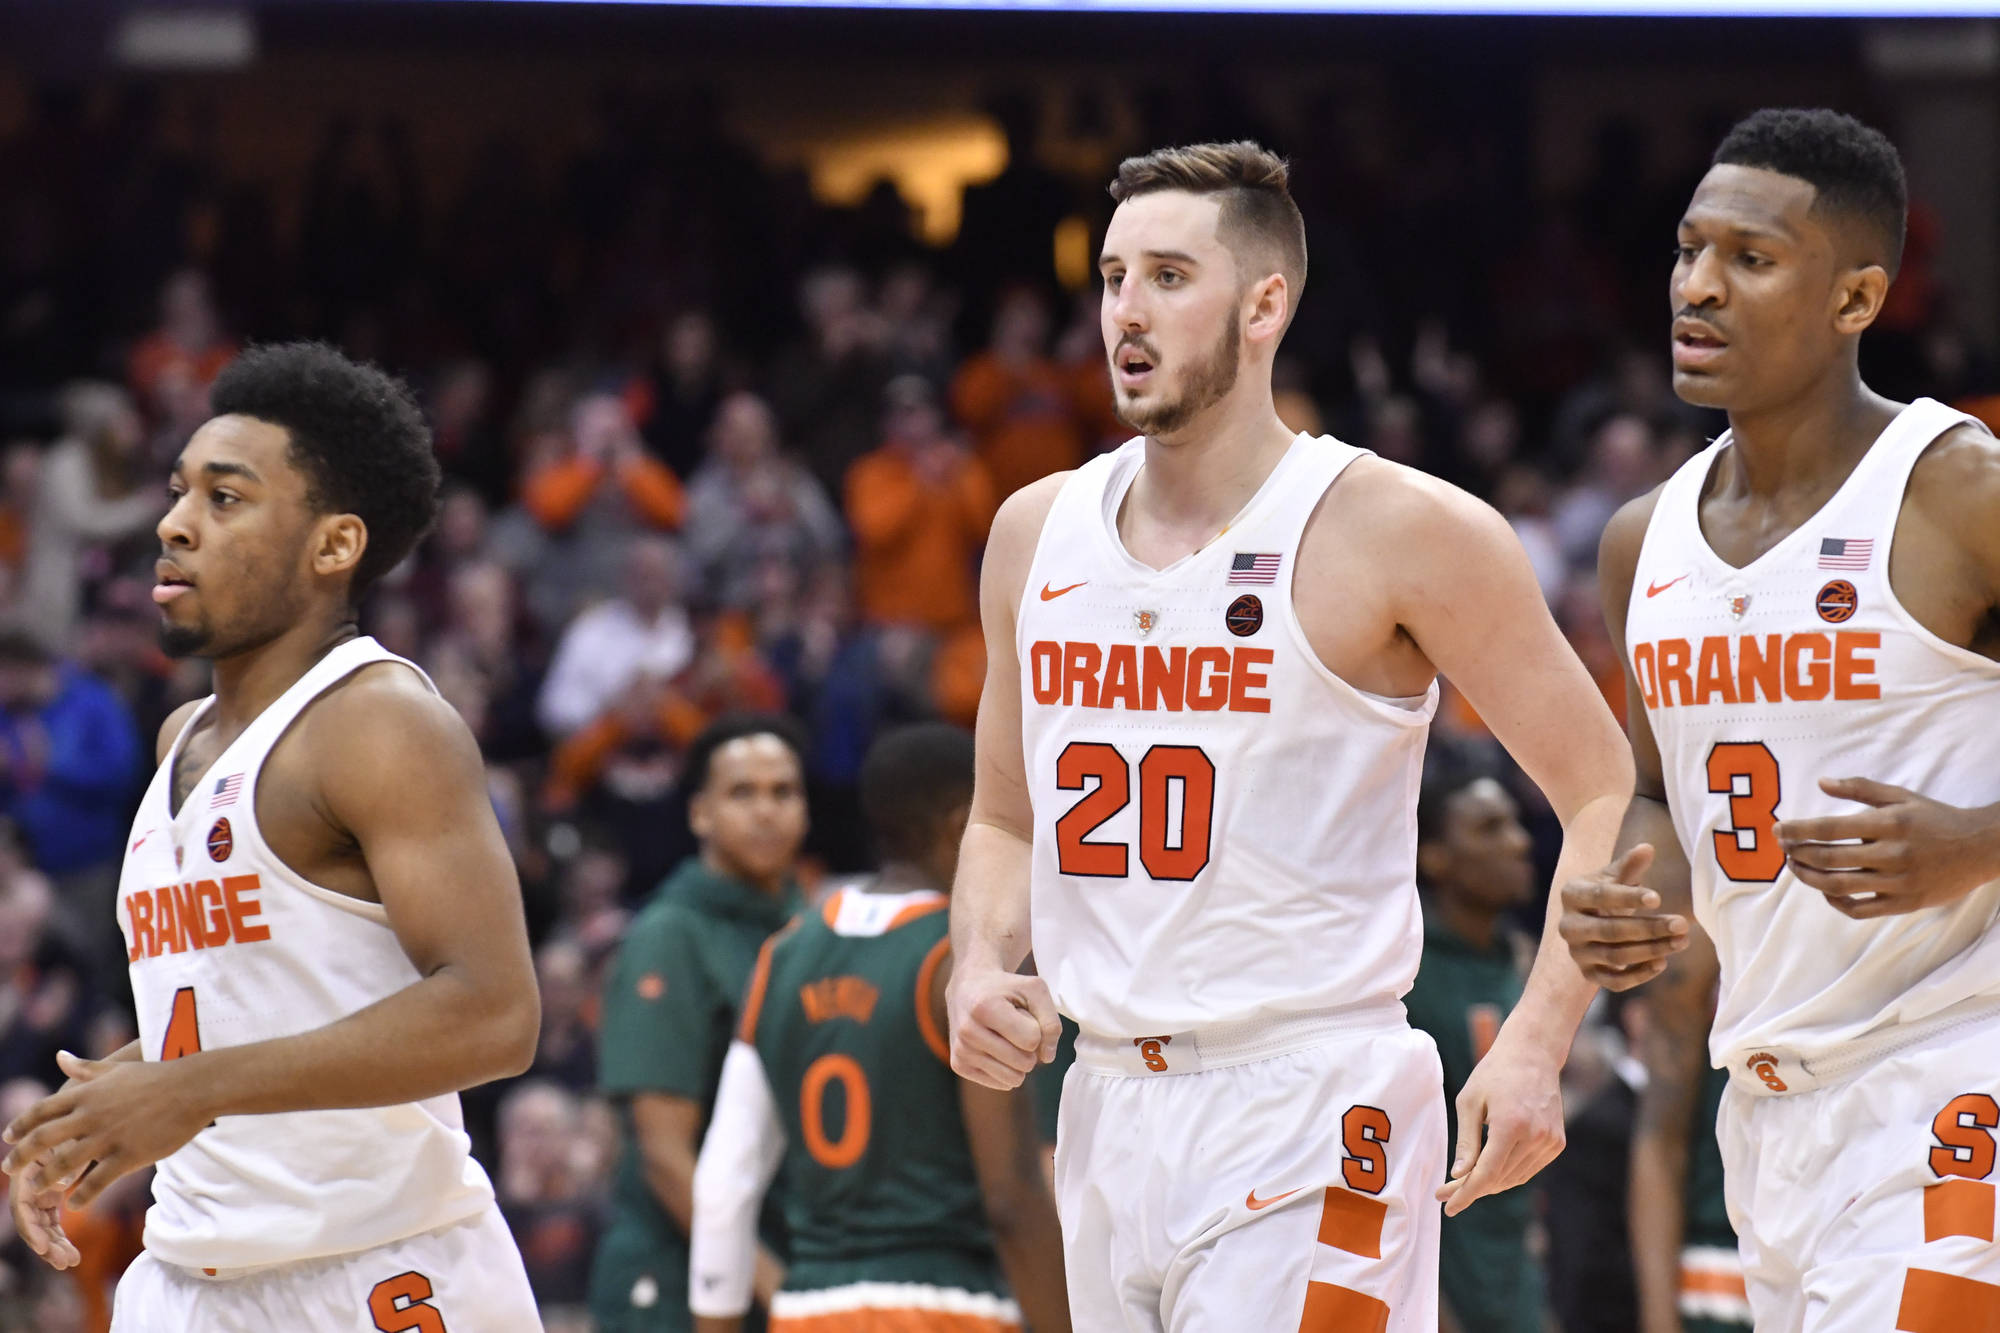 Syracuse gets back on track with an ACC win over Miami